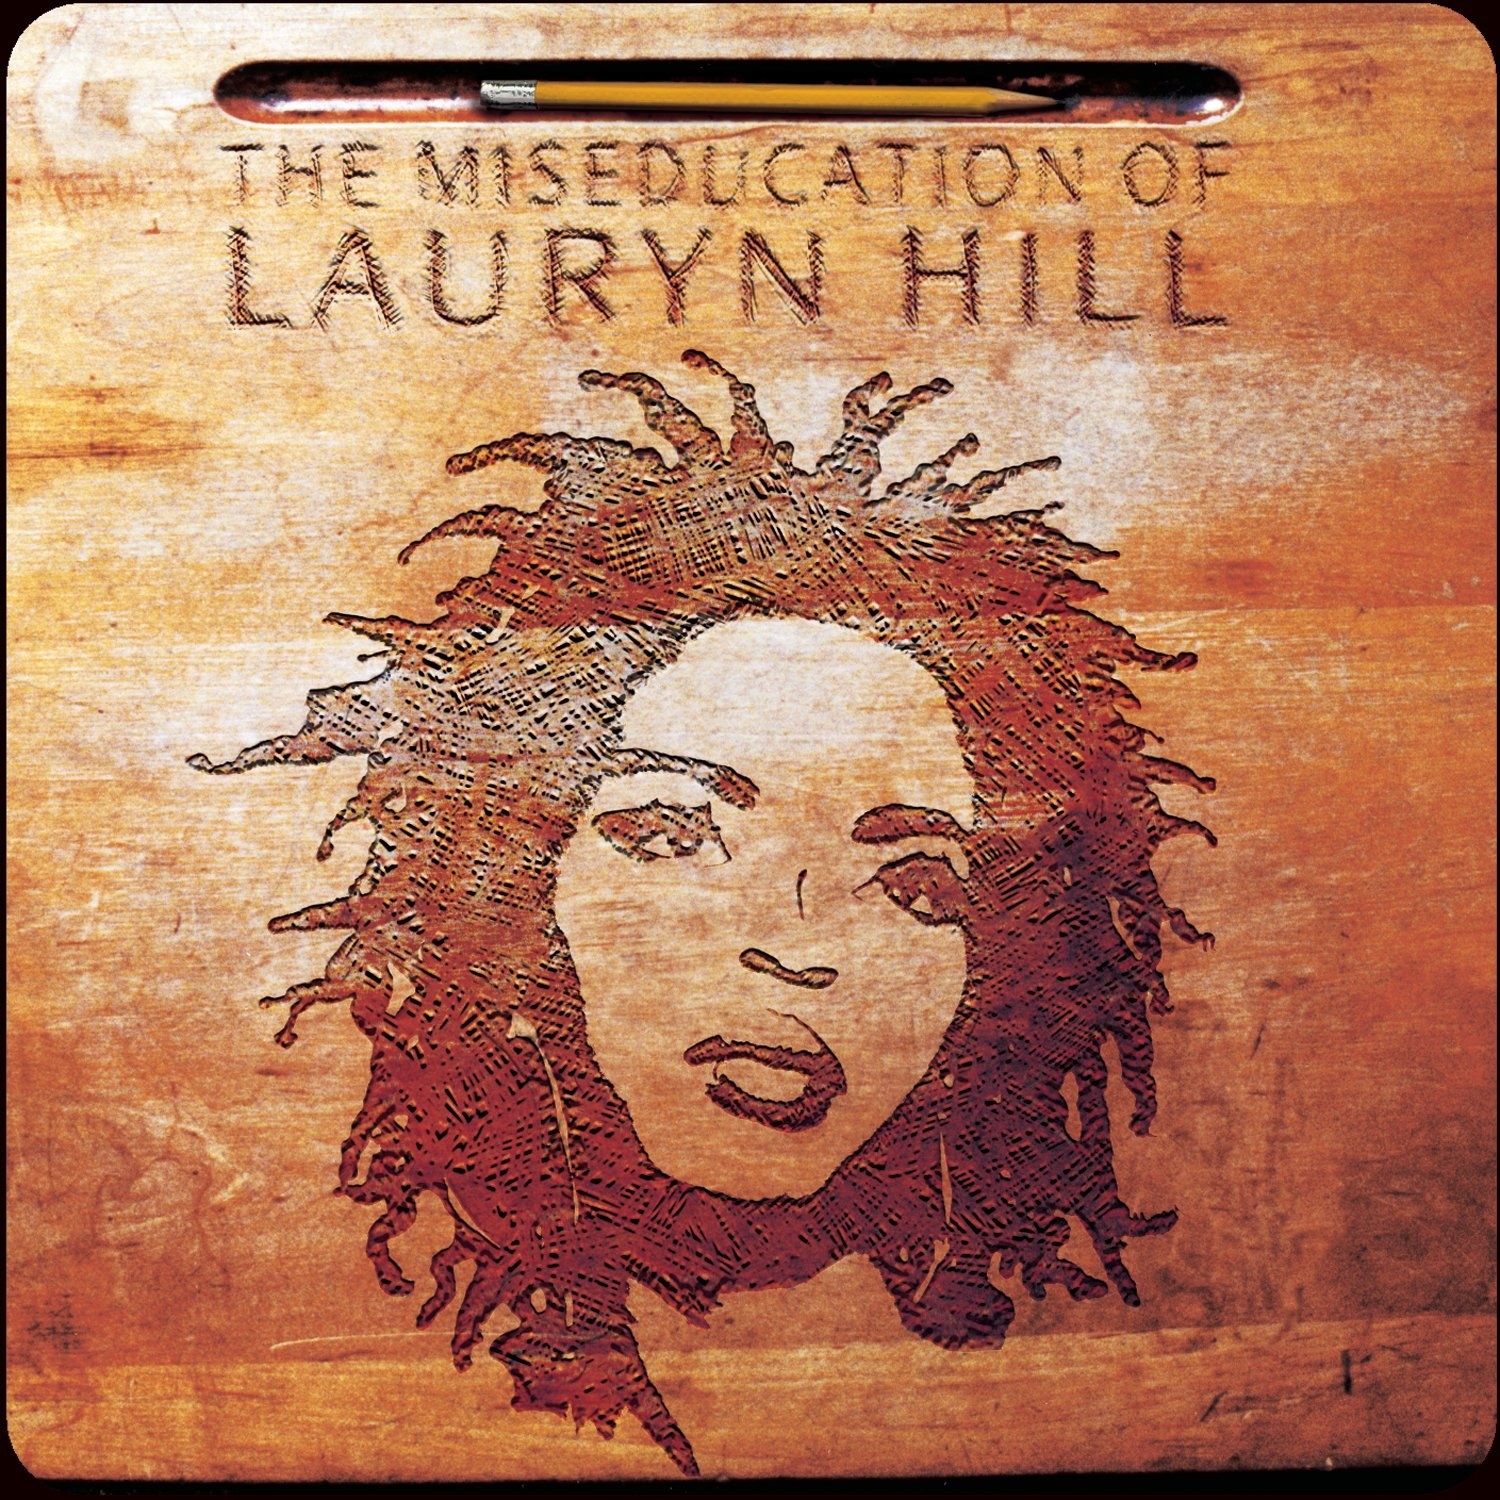 The Miseducation of Lauryn Hill album cover